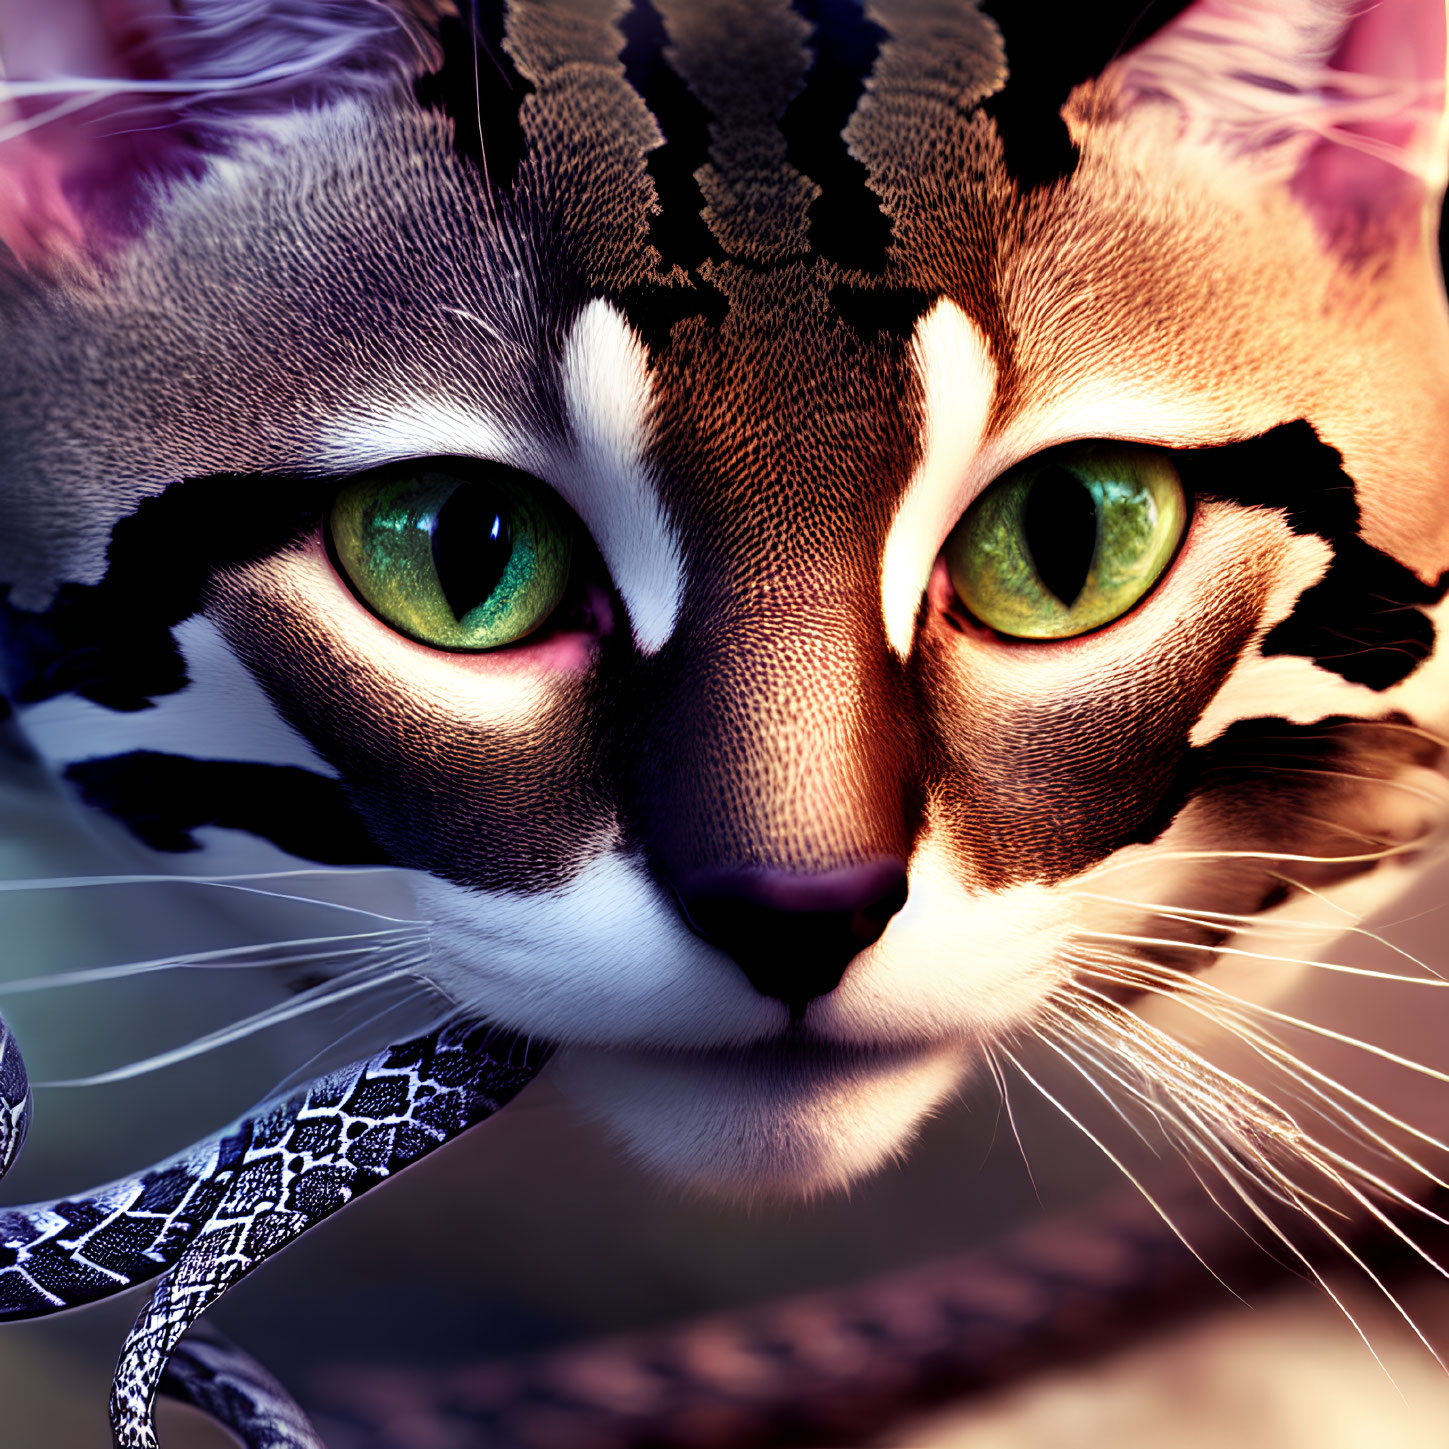 Digital art of a cat with green eyes and puzzle piece fur on warm background